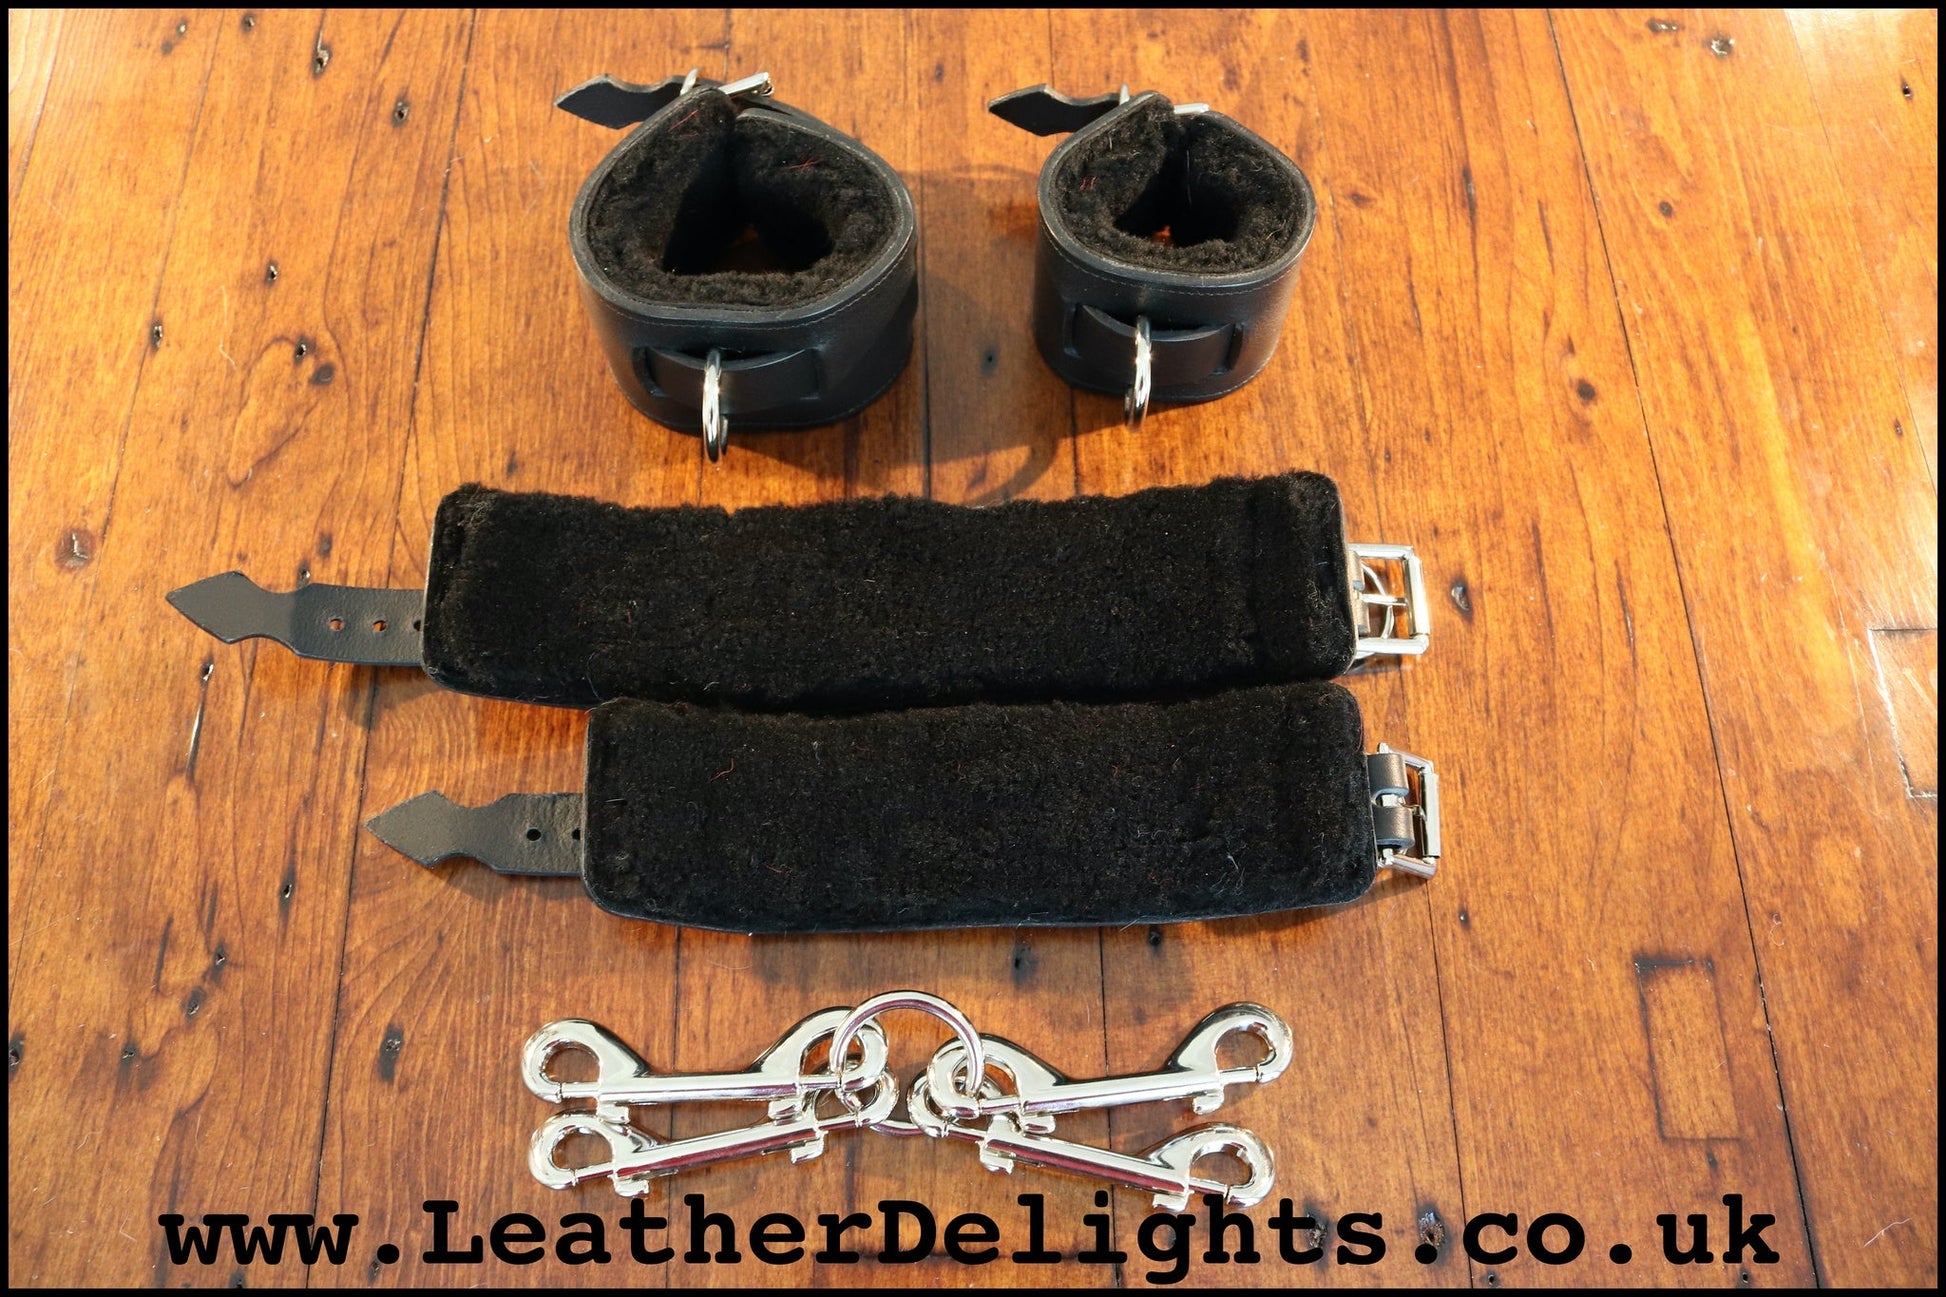 Black Wrist & Ankle Cuffs with Sheepskin Lining – Leather Delights